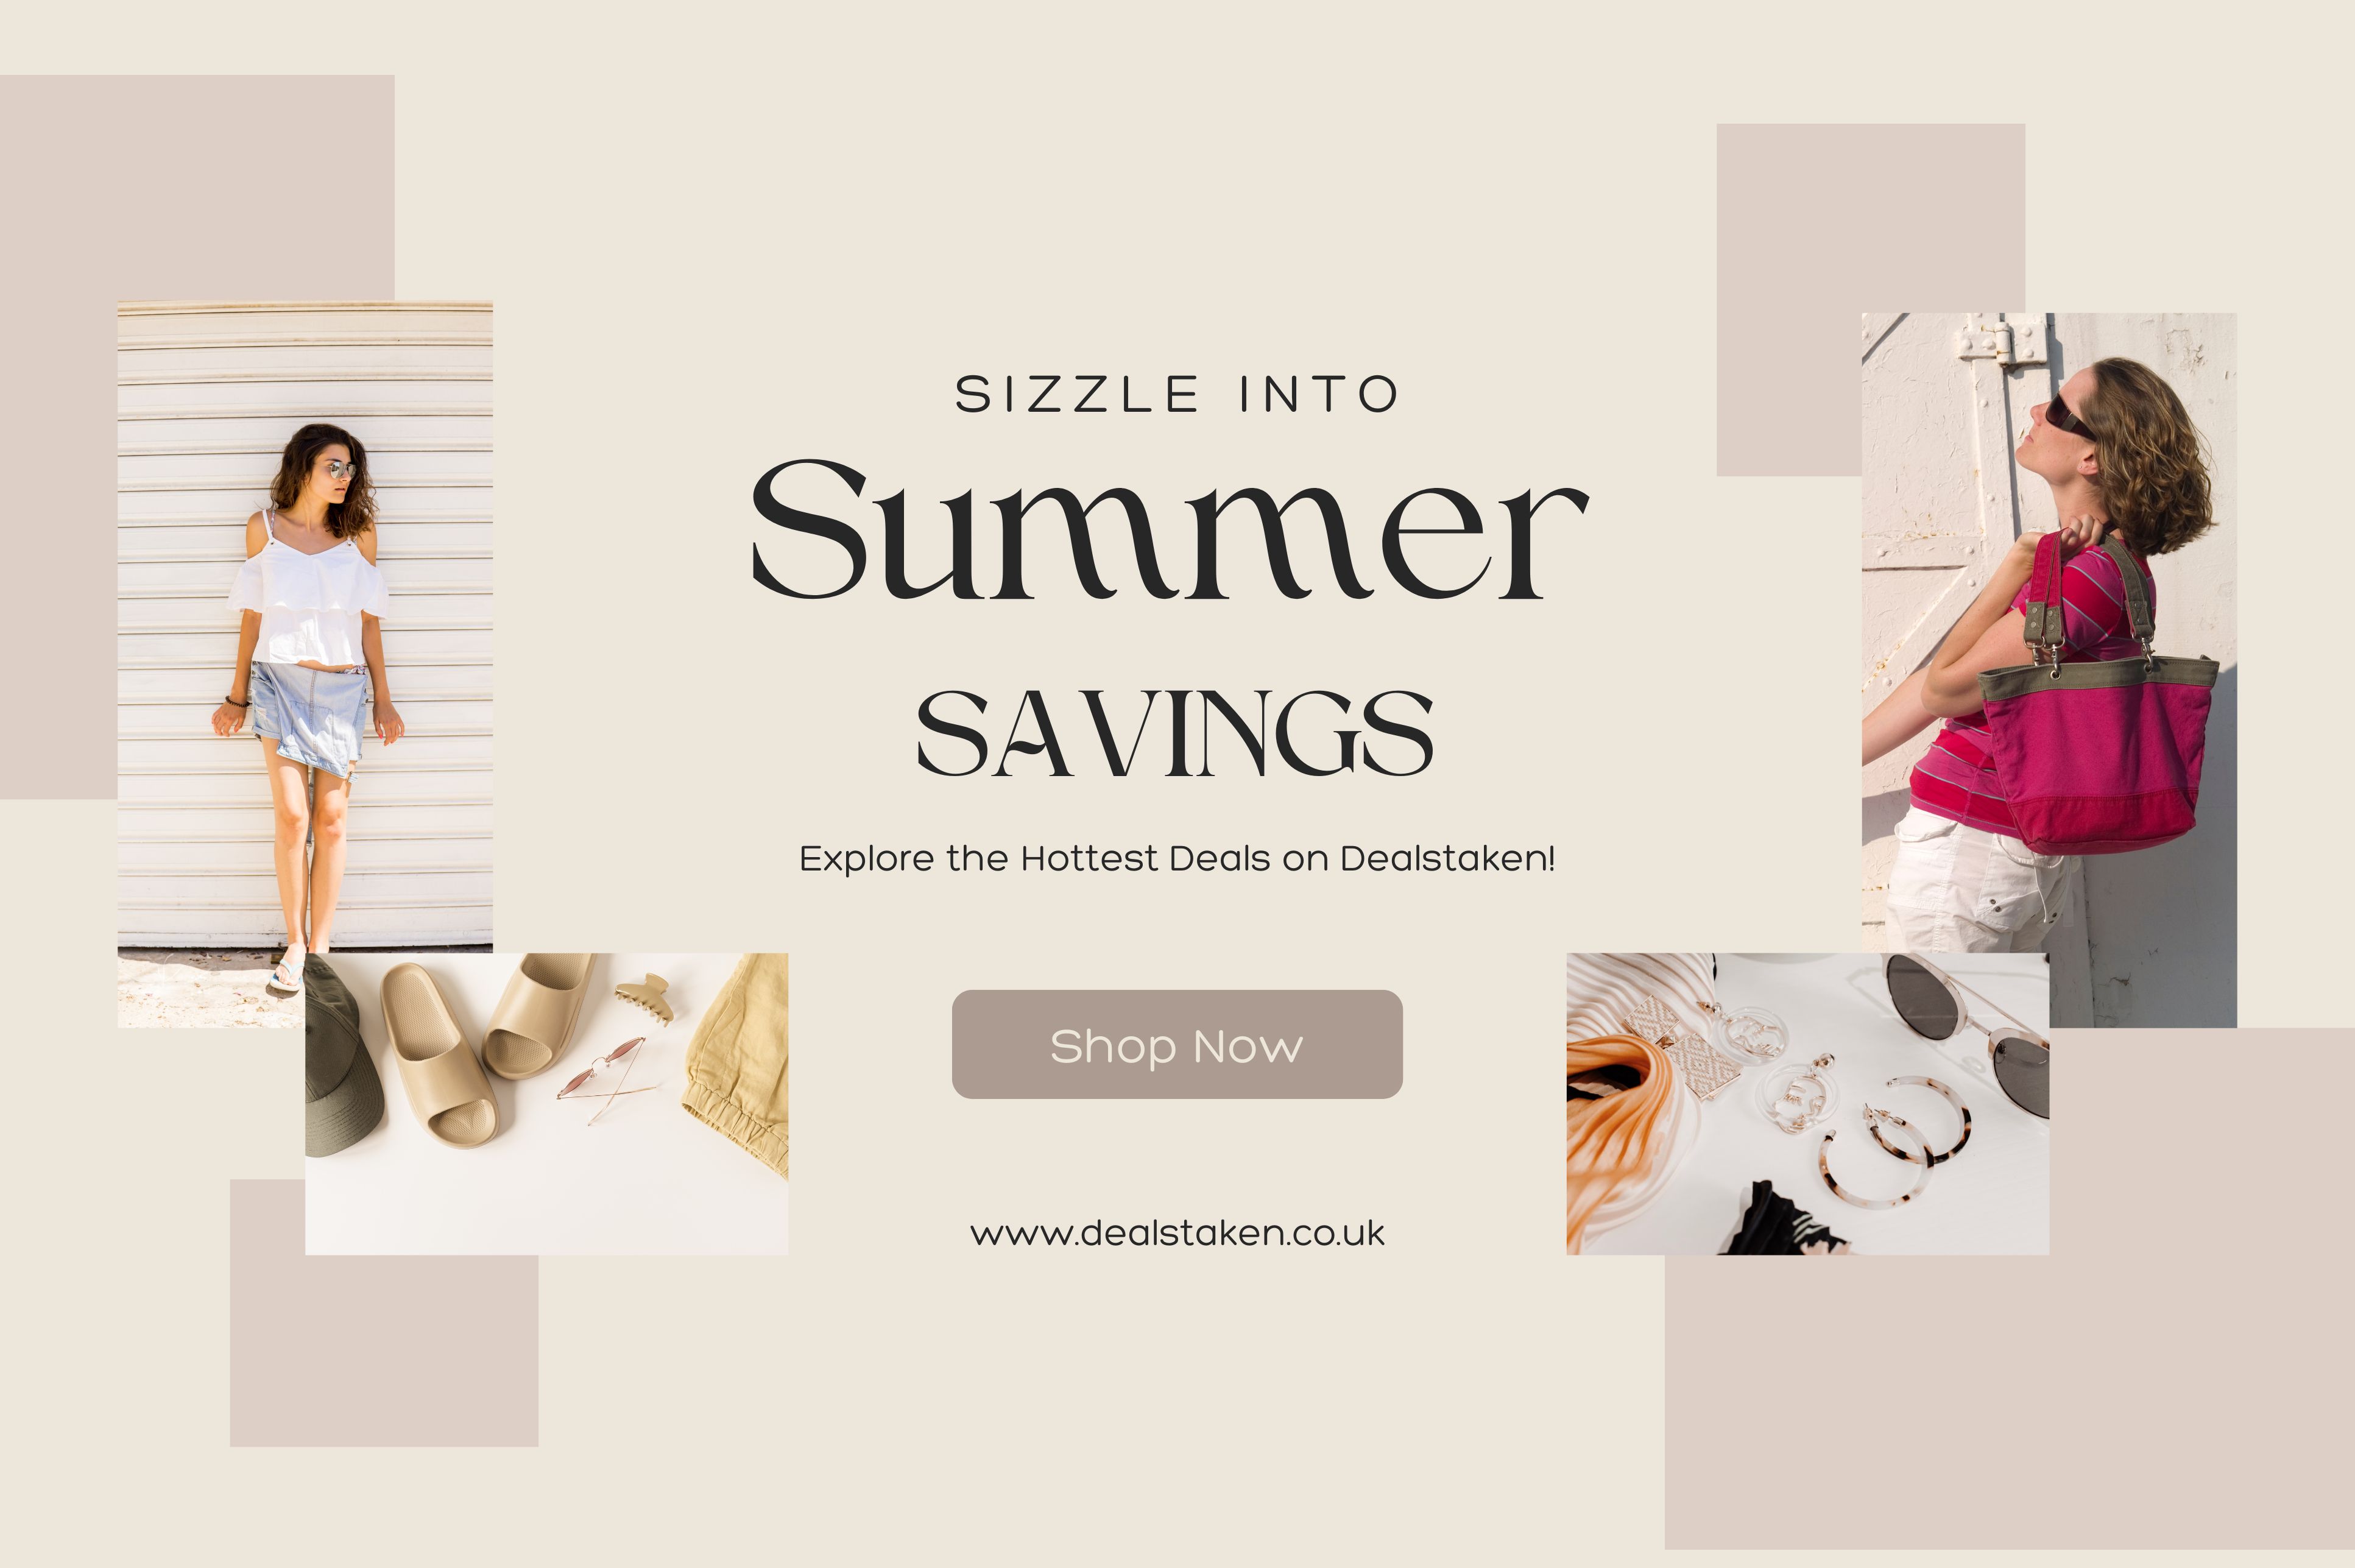 sizzle-into-summer-savings-explore-the-hottest-deals-on-dealstaken